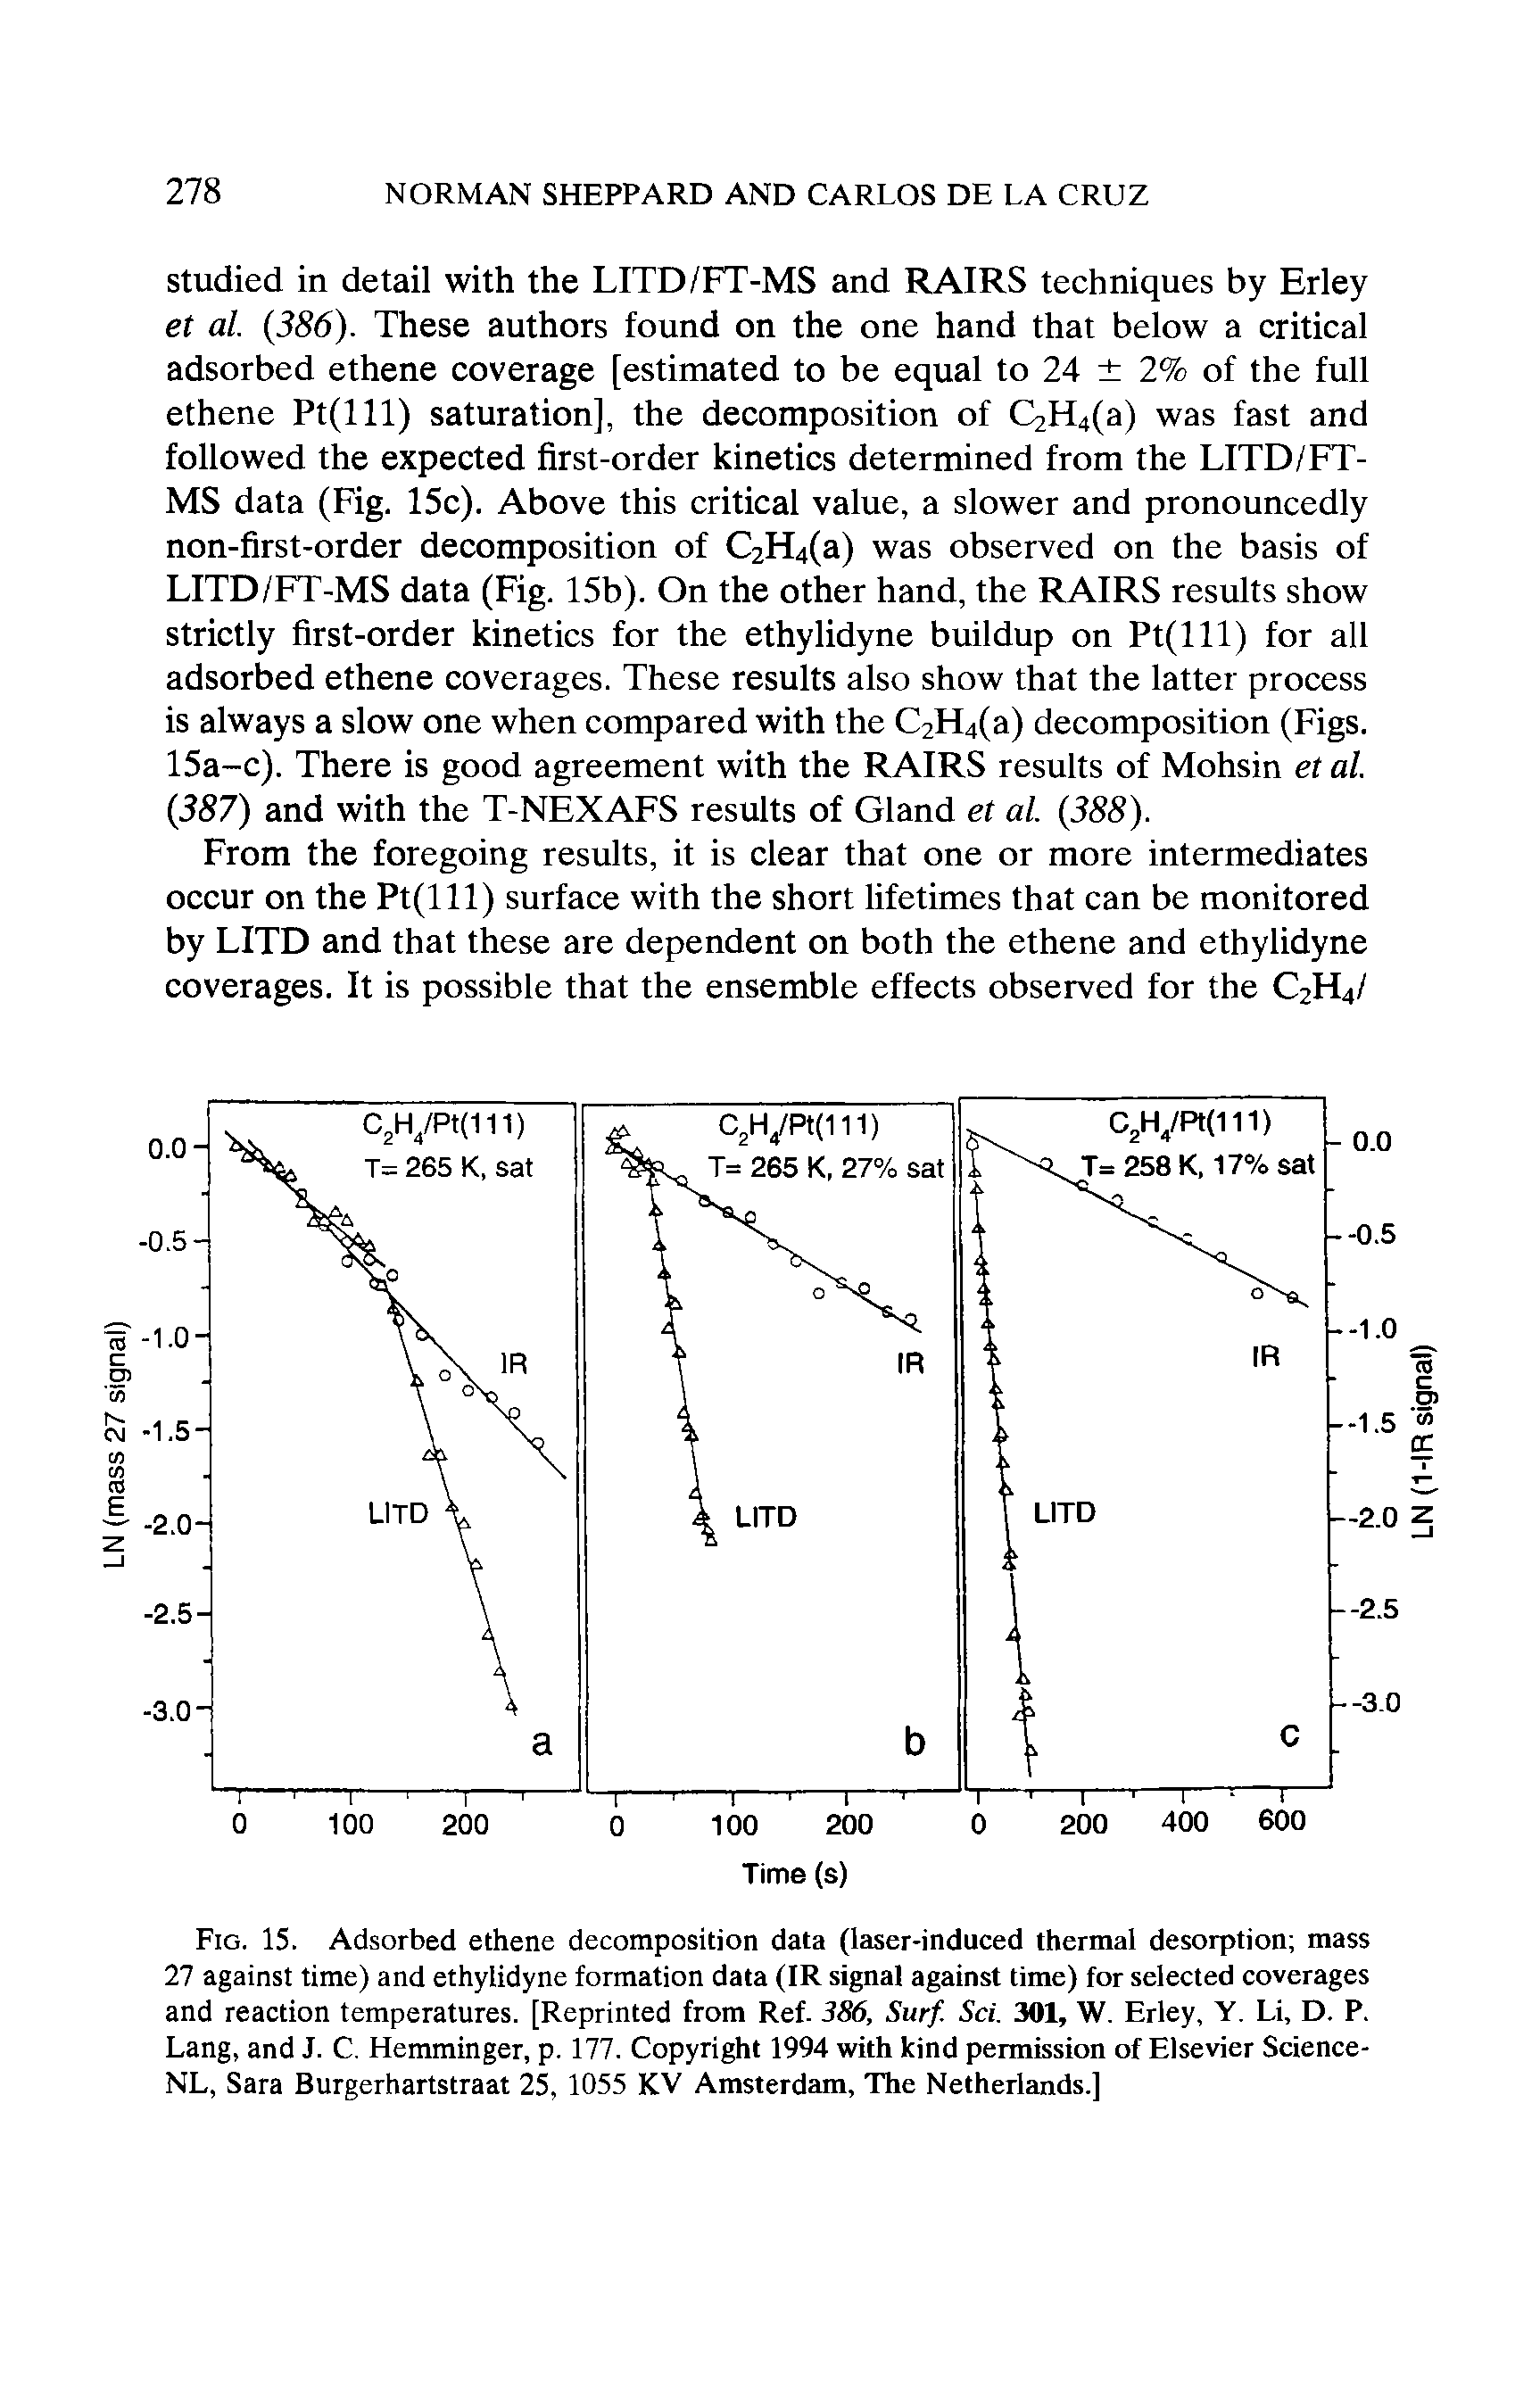 Fig. 15. Adsorbed ethene decomposition data (laser-induced thermal desorption mass 27 against time) and ethylidyne formation data (IR signal against time) for selected coverages and reaction temperatures. [Reprinted from Ref. 386, Surf. Sci. 301, W. Erley, Y. Li, D. P. Lang, and J. C. Hemminger, p. 177. Copyright 1994 with kind permission of Elsevier Science-NL, Sara Burgerhartstraat 25, 1055 KV Amsterdam, The Netherlands.]...